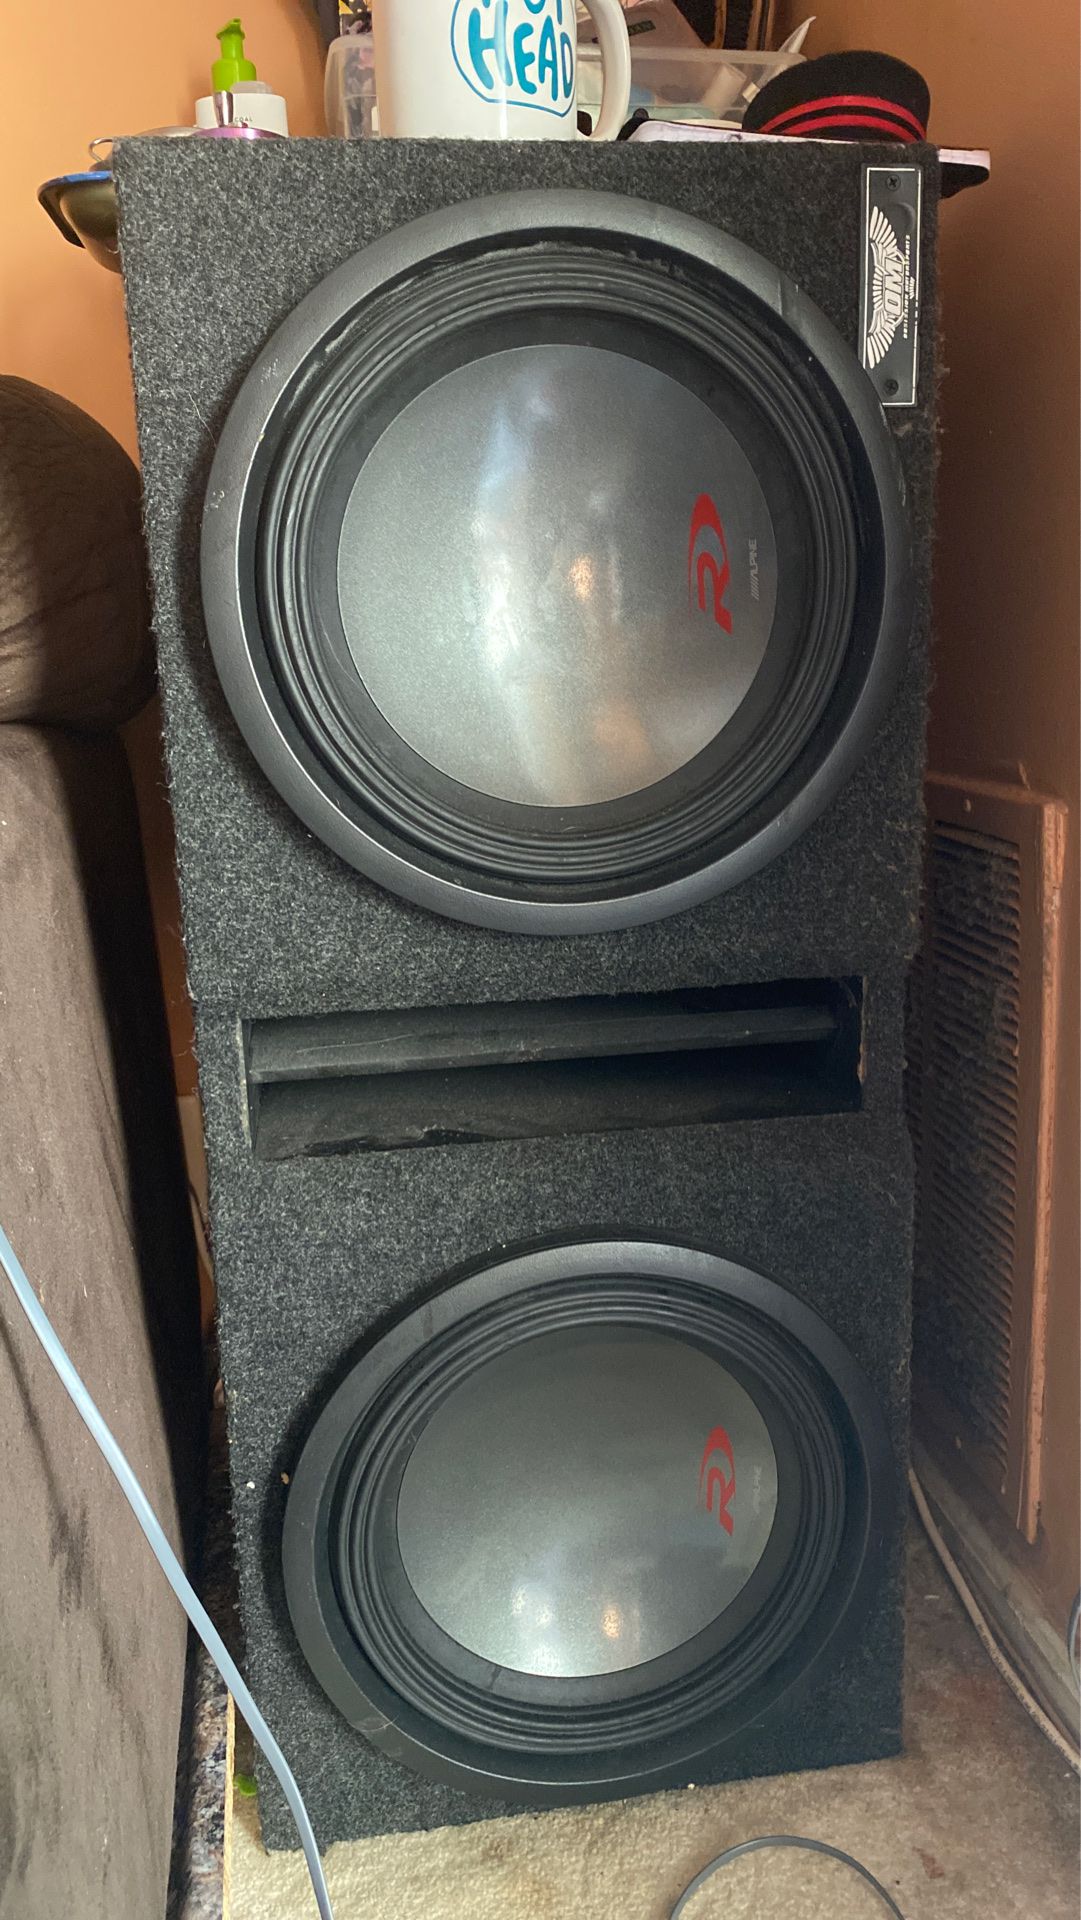 2x 12” Alpine subwoofers in a ported OM ( Obsession Motors) Box